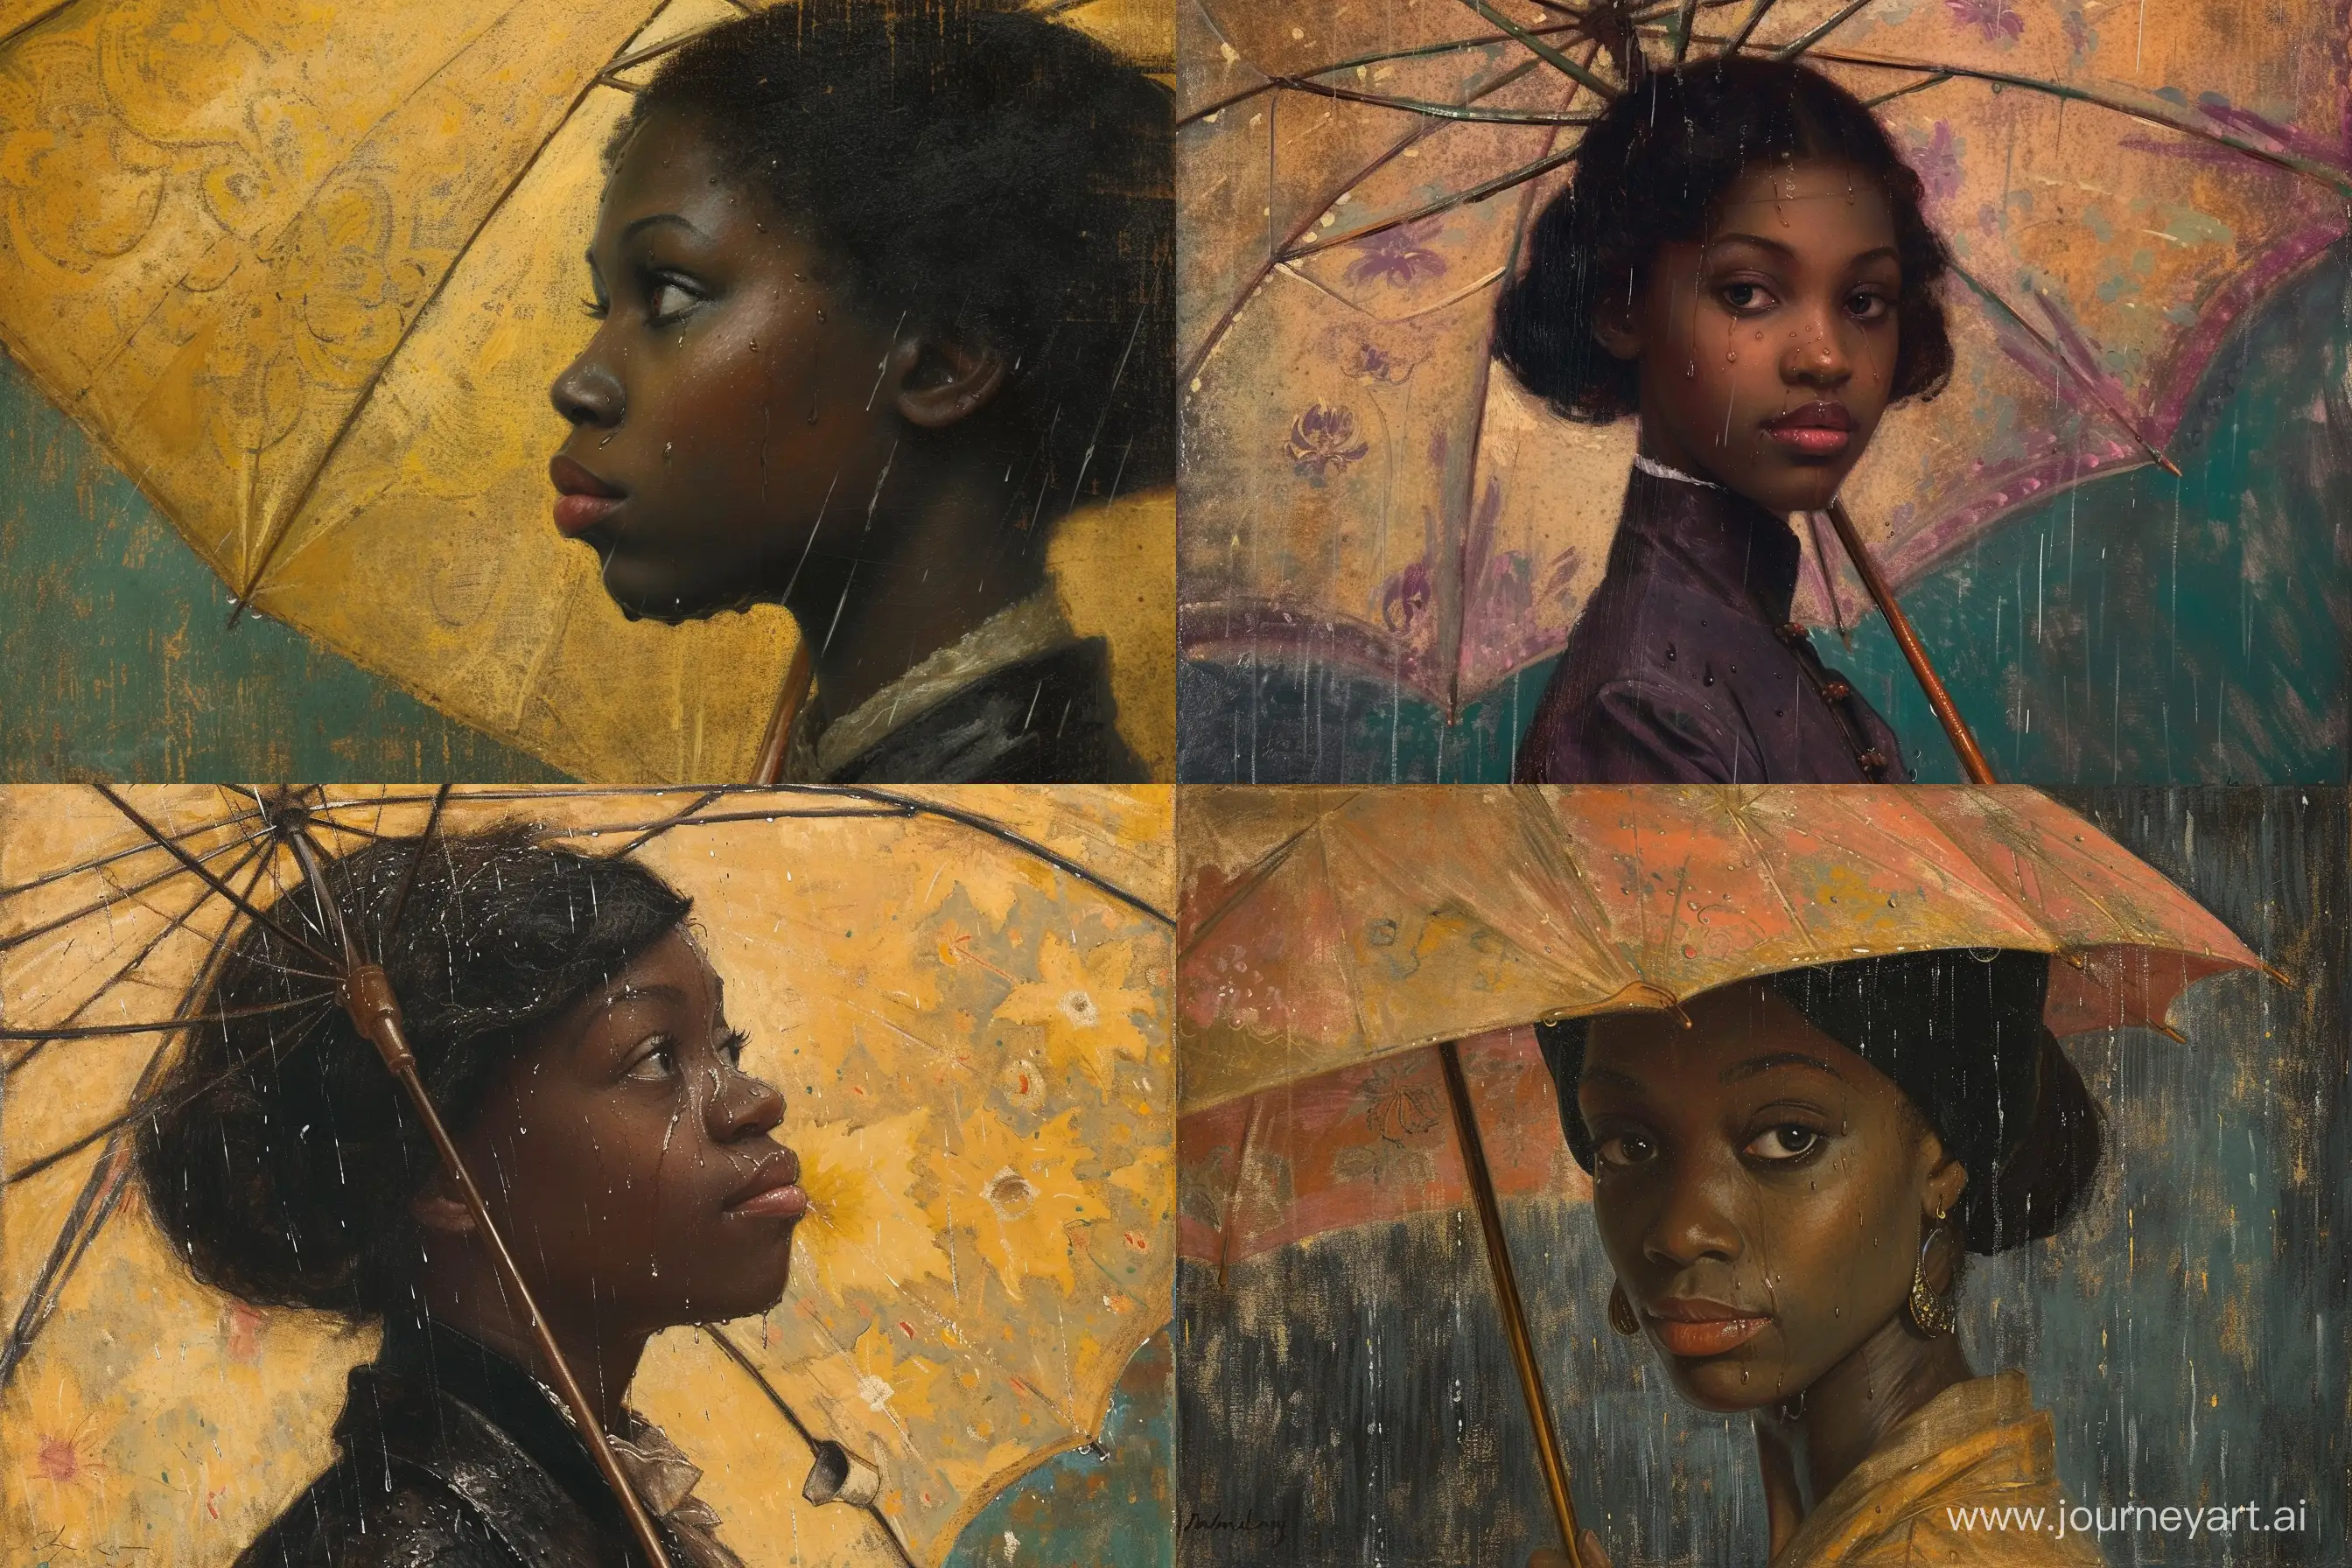 1920s-Vintage-Portrait-Young-Black-Woman-with-Umbrella-in-the-Rain